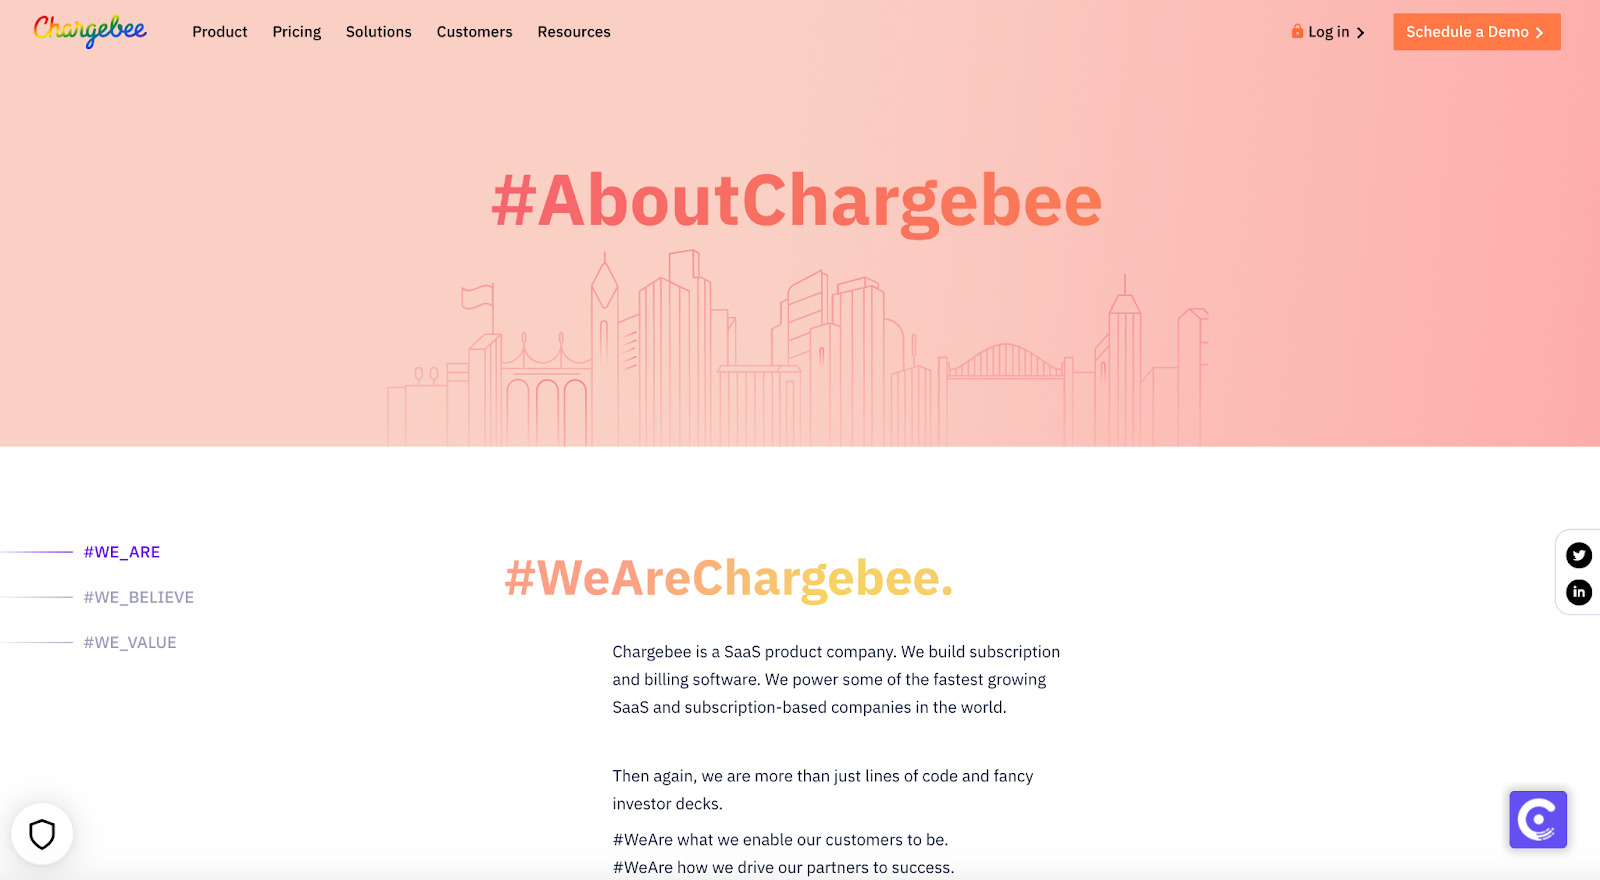 Chargbee’s About Us page is an essential component of its site.